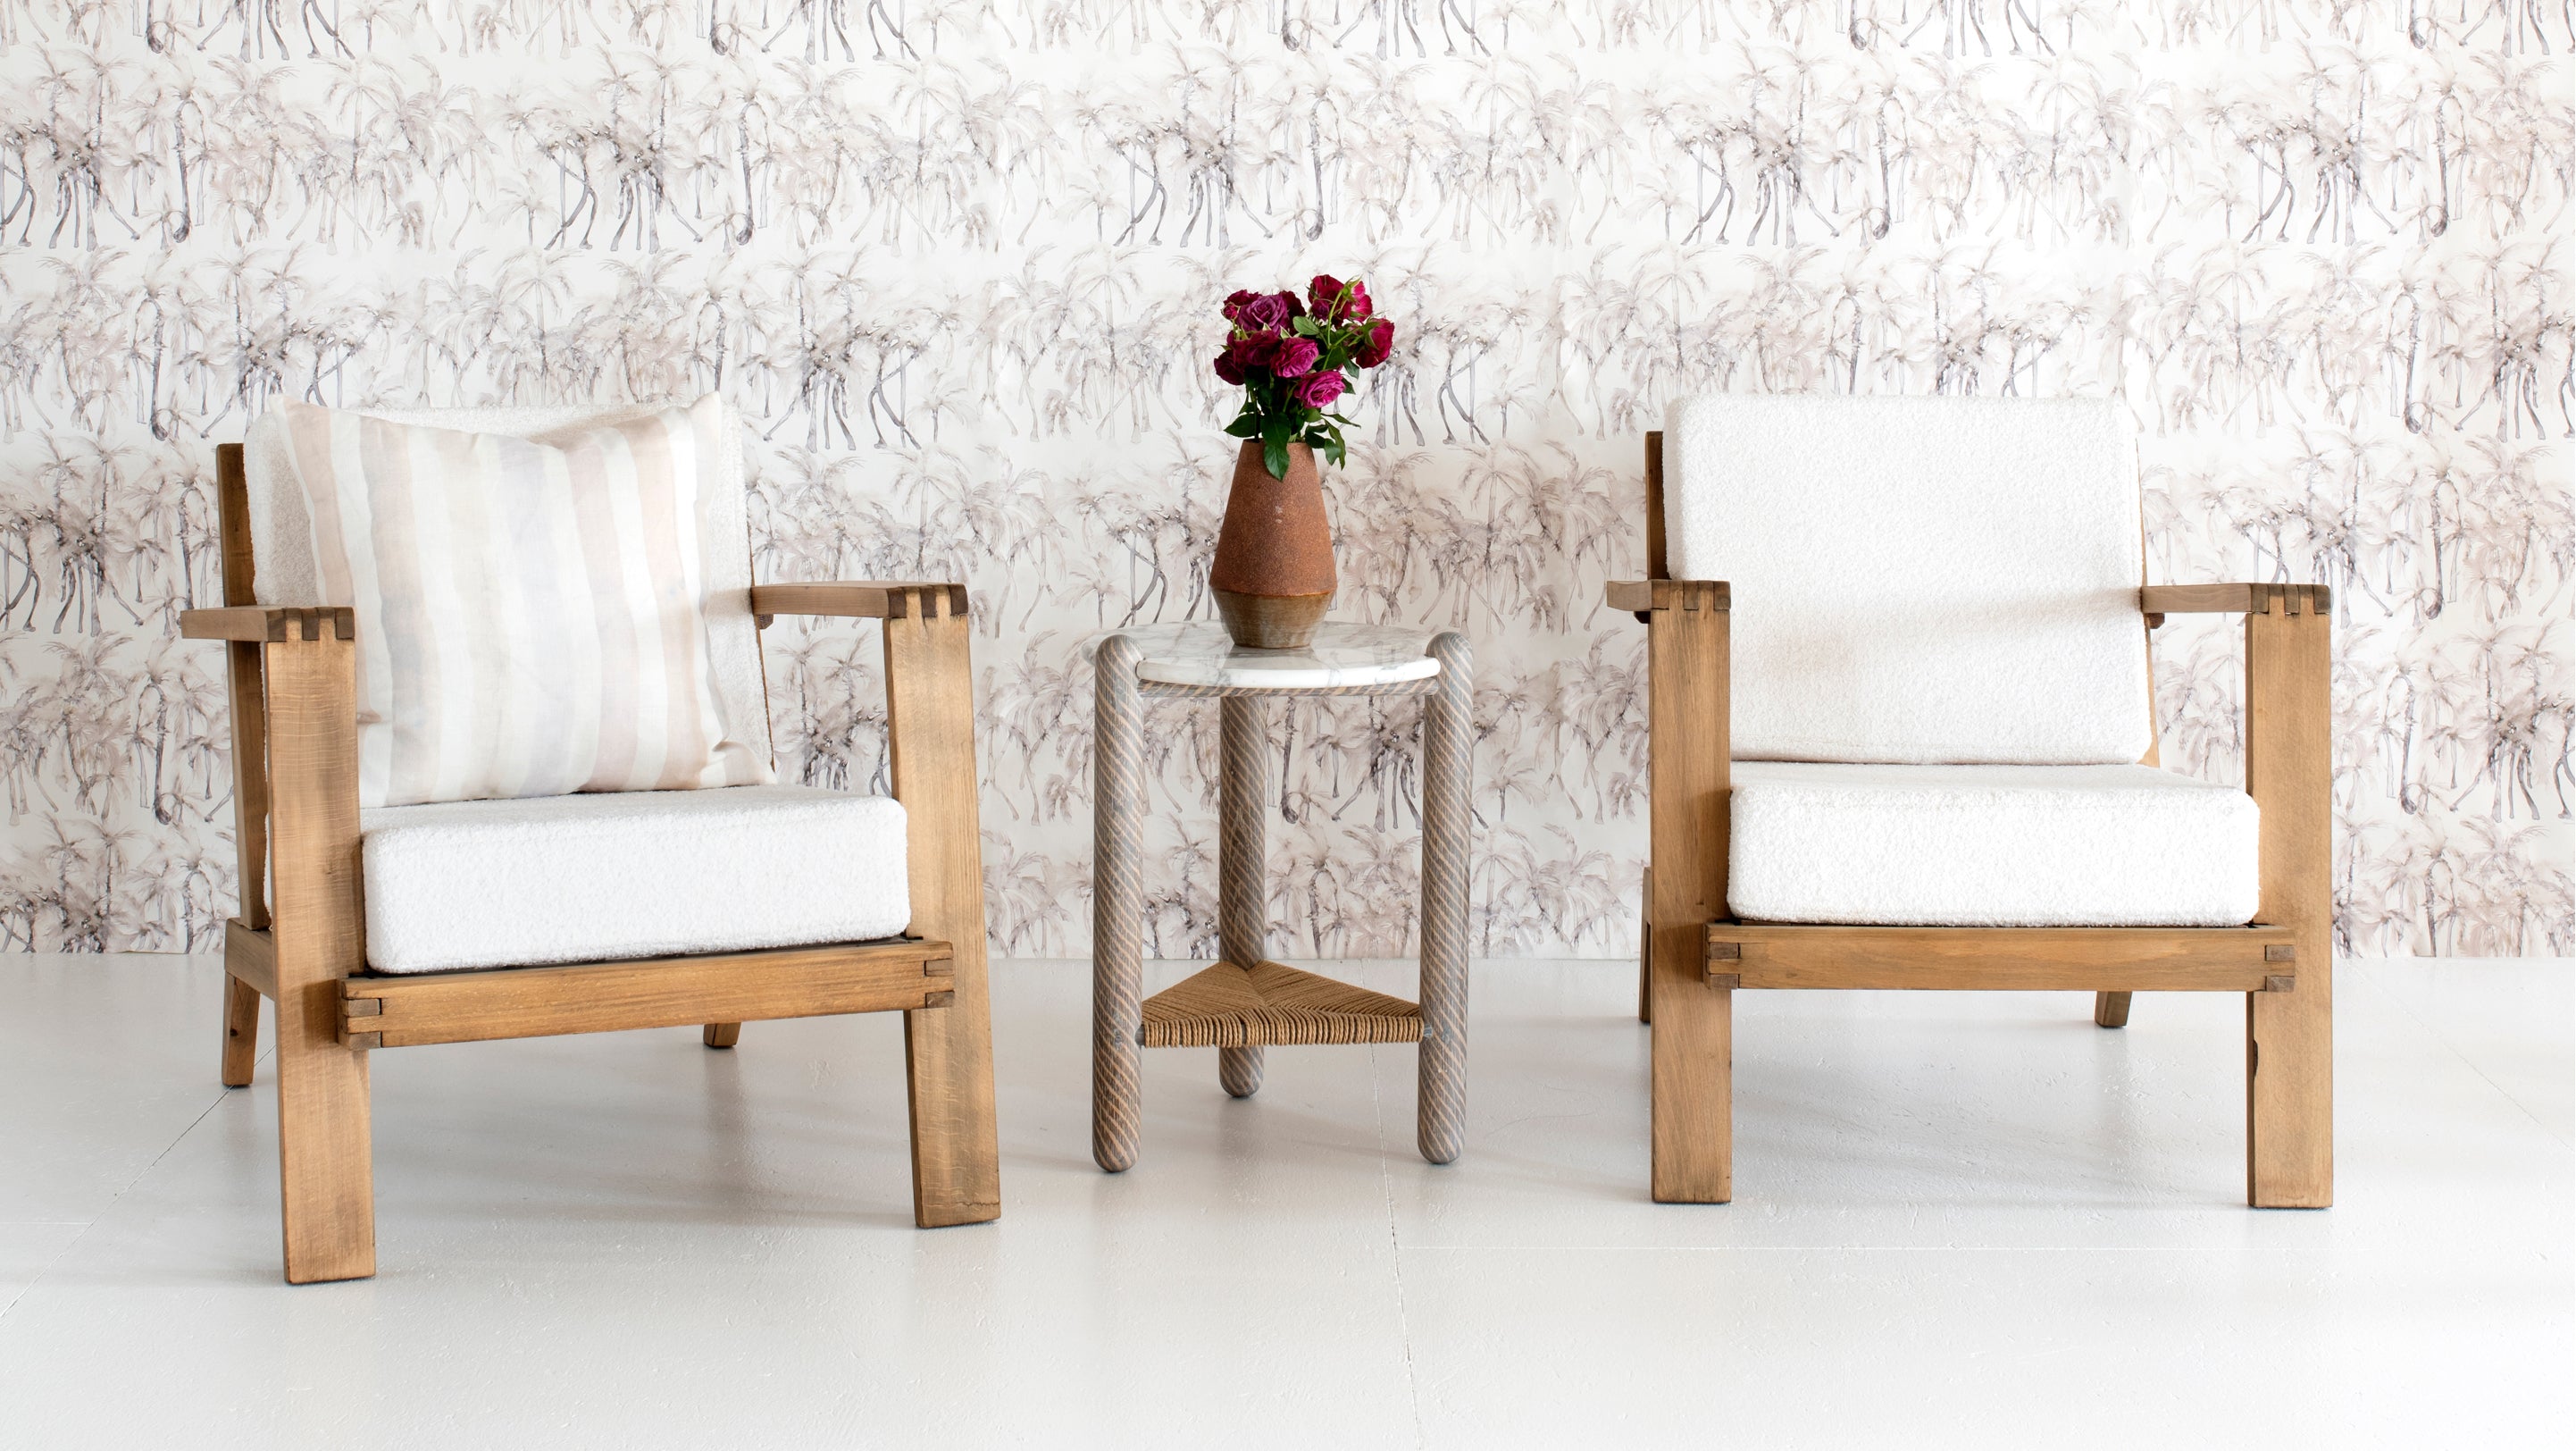 Two chairs and a table in front of wallpaper